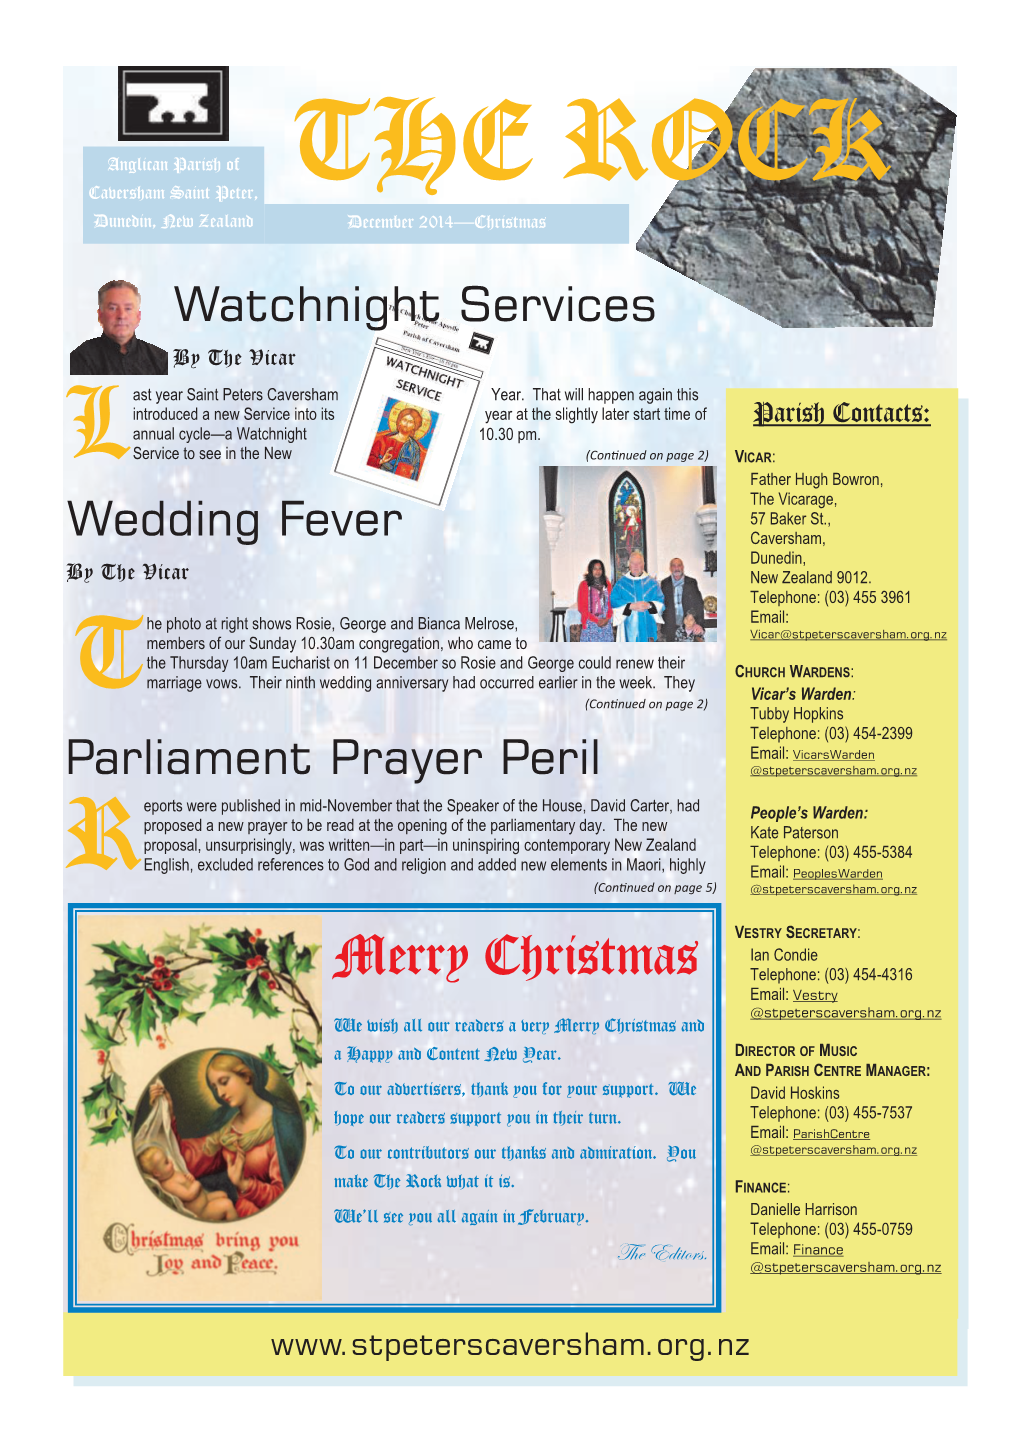 Merry Christmas Telephone: (03) 454-4316 Email: Vestry @Stpeterscaversham.Org.Nz We Wish All Our Readers a Very Merry Christmas and a Happy and Content New Year